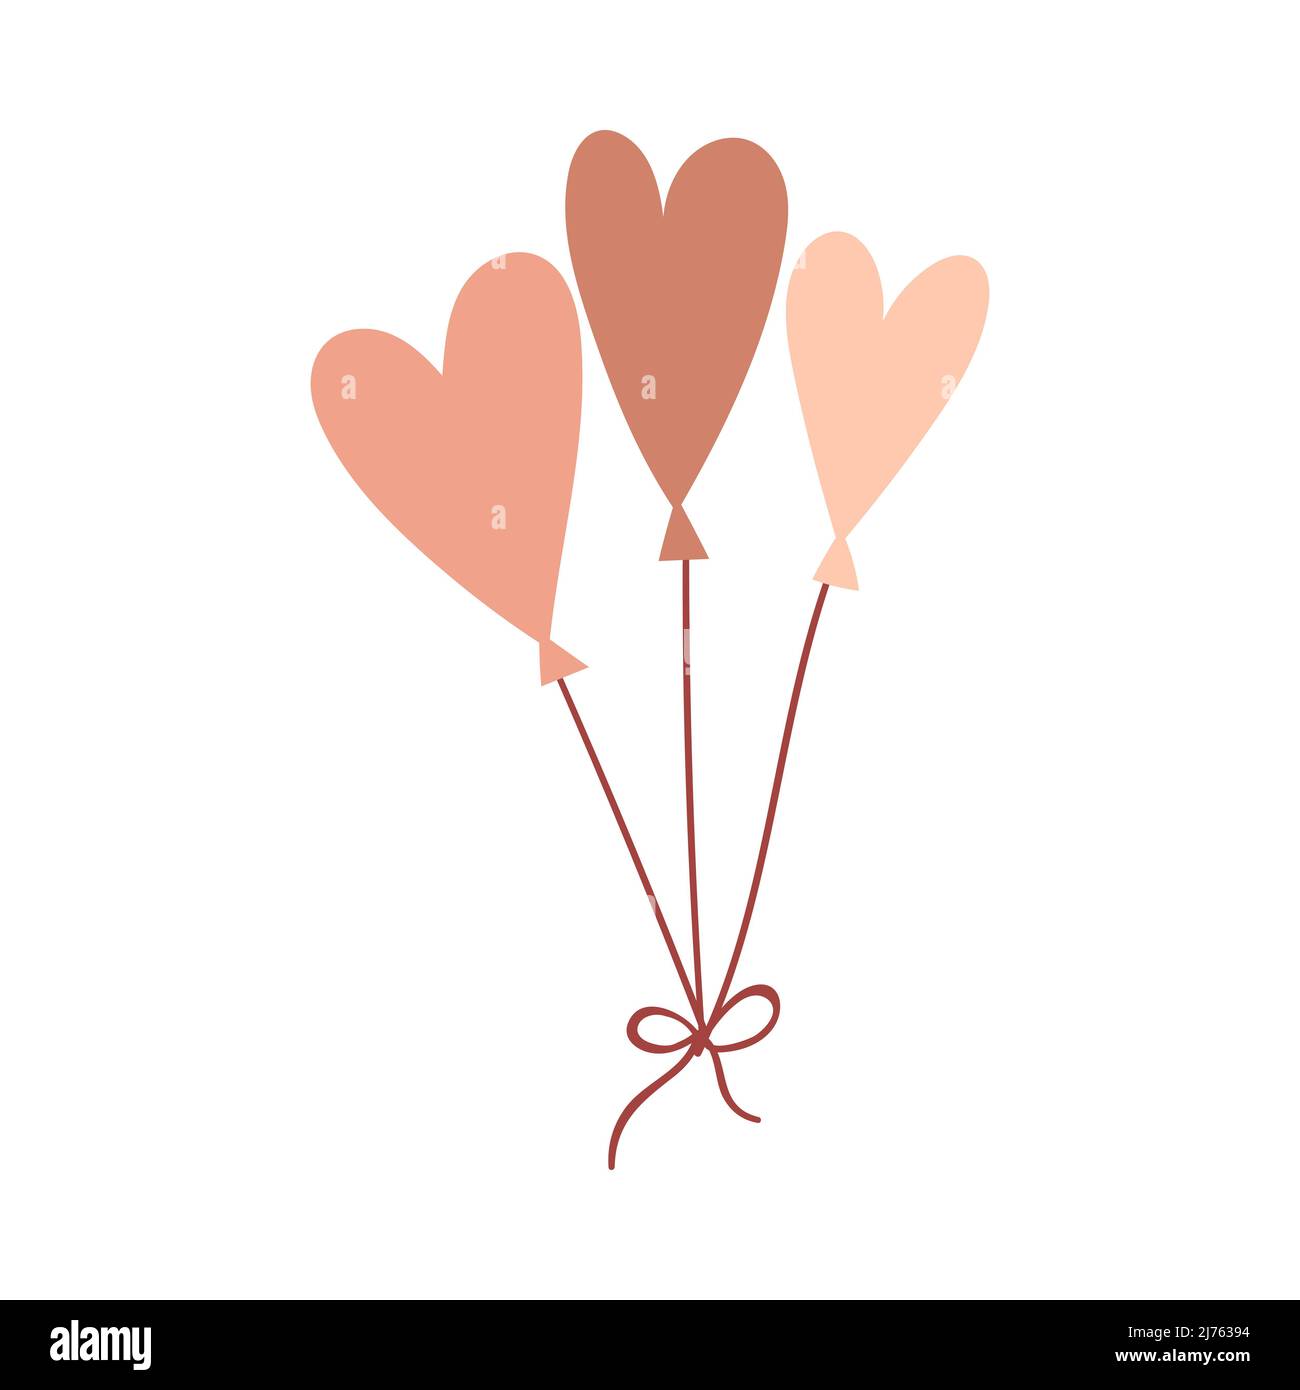 Balloons in the shape of a heart. Cute decorative element for Valentine's Day greeting cards. Vector illustration isolated on a white background Stock Vector